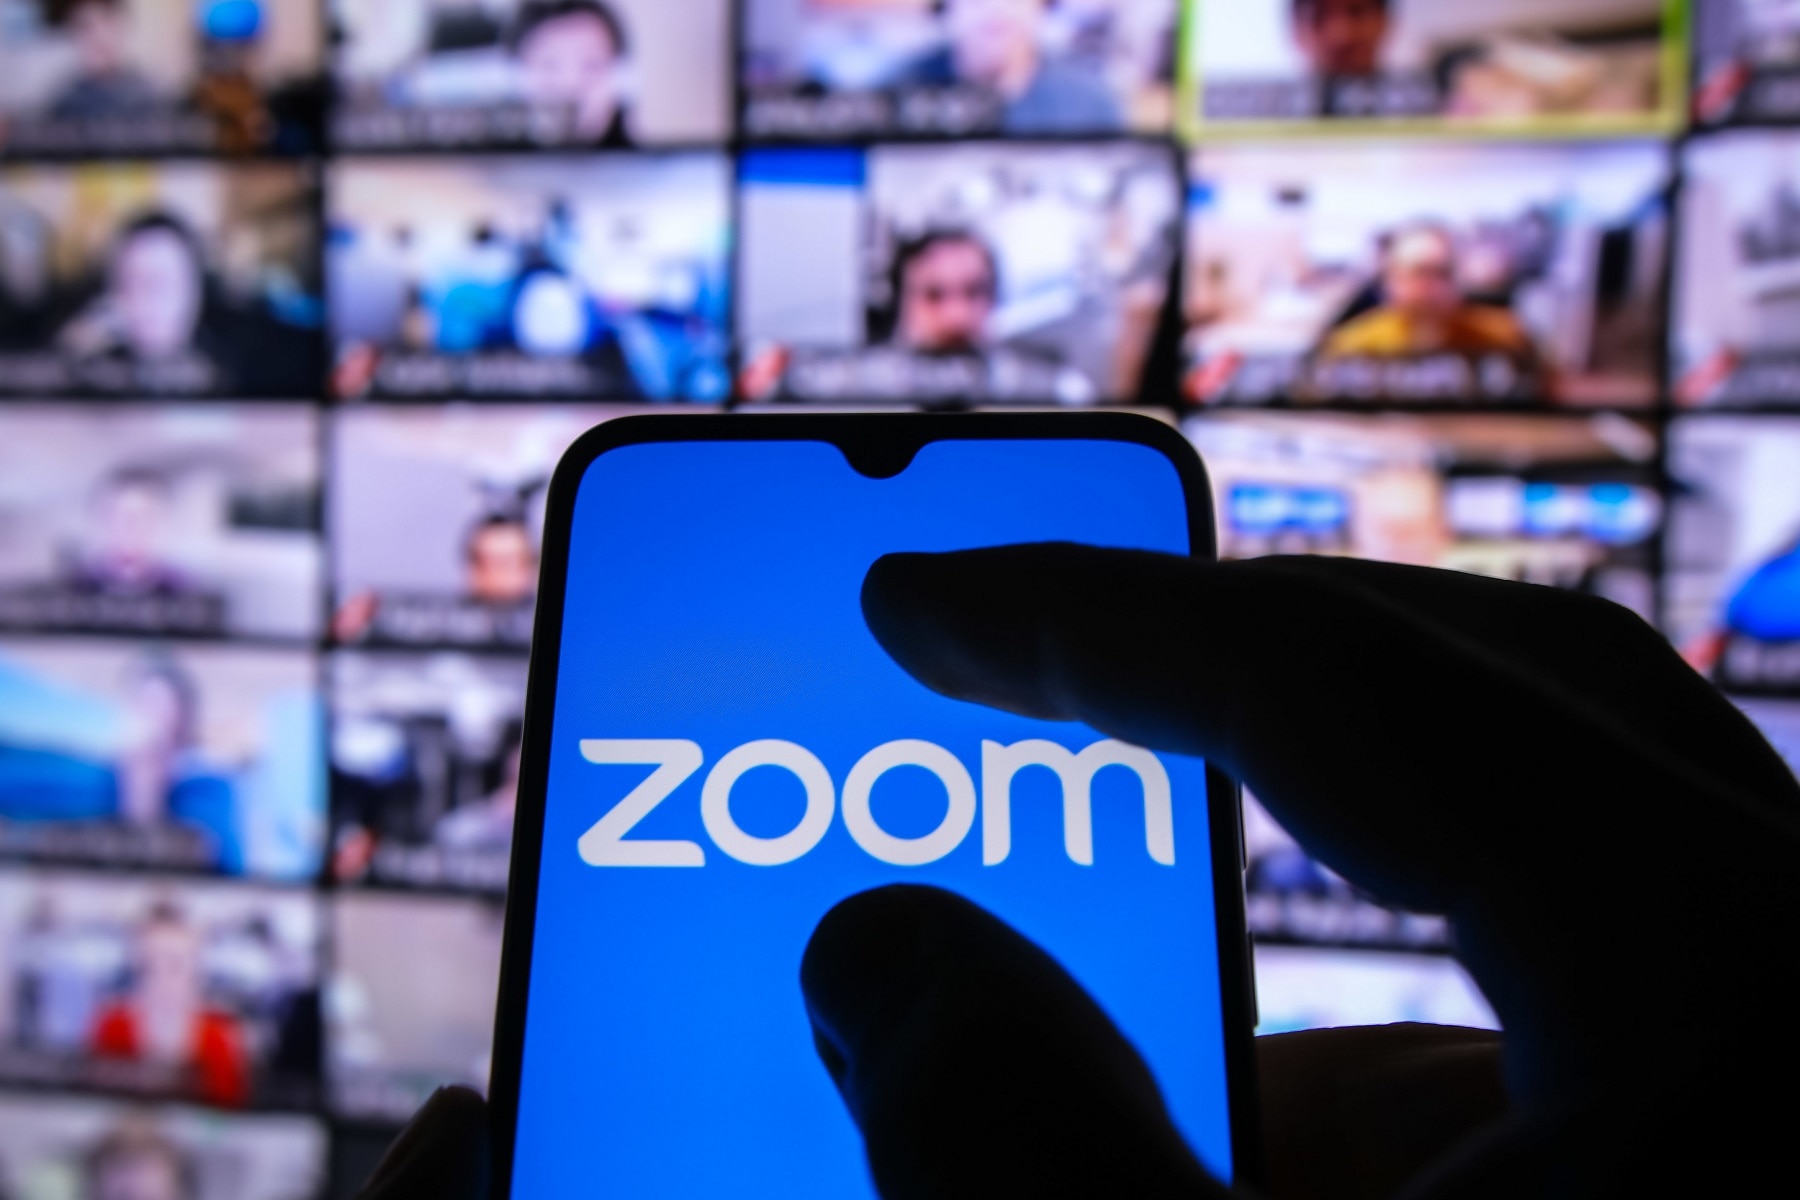 India bans government use of Zoom over security concerns